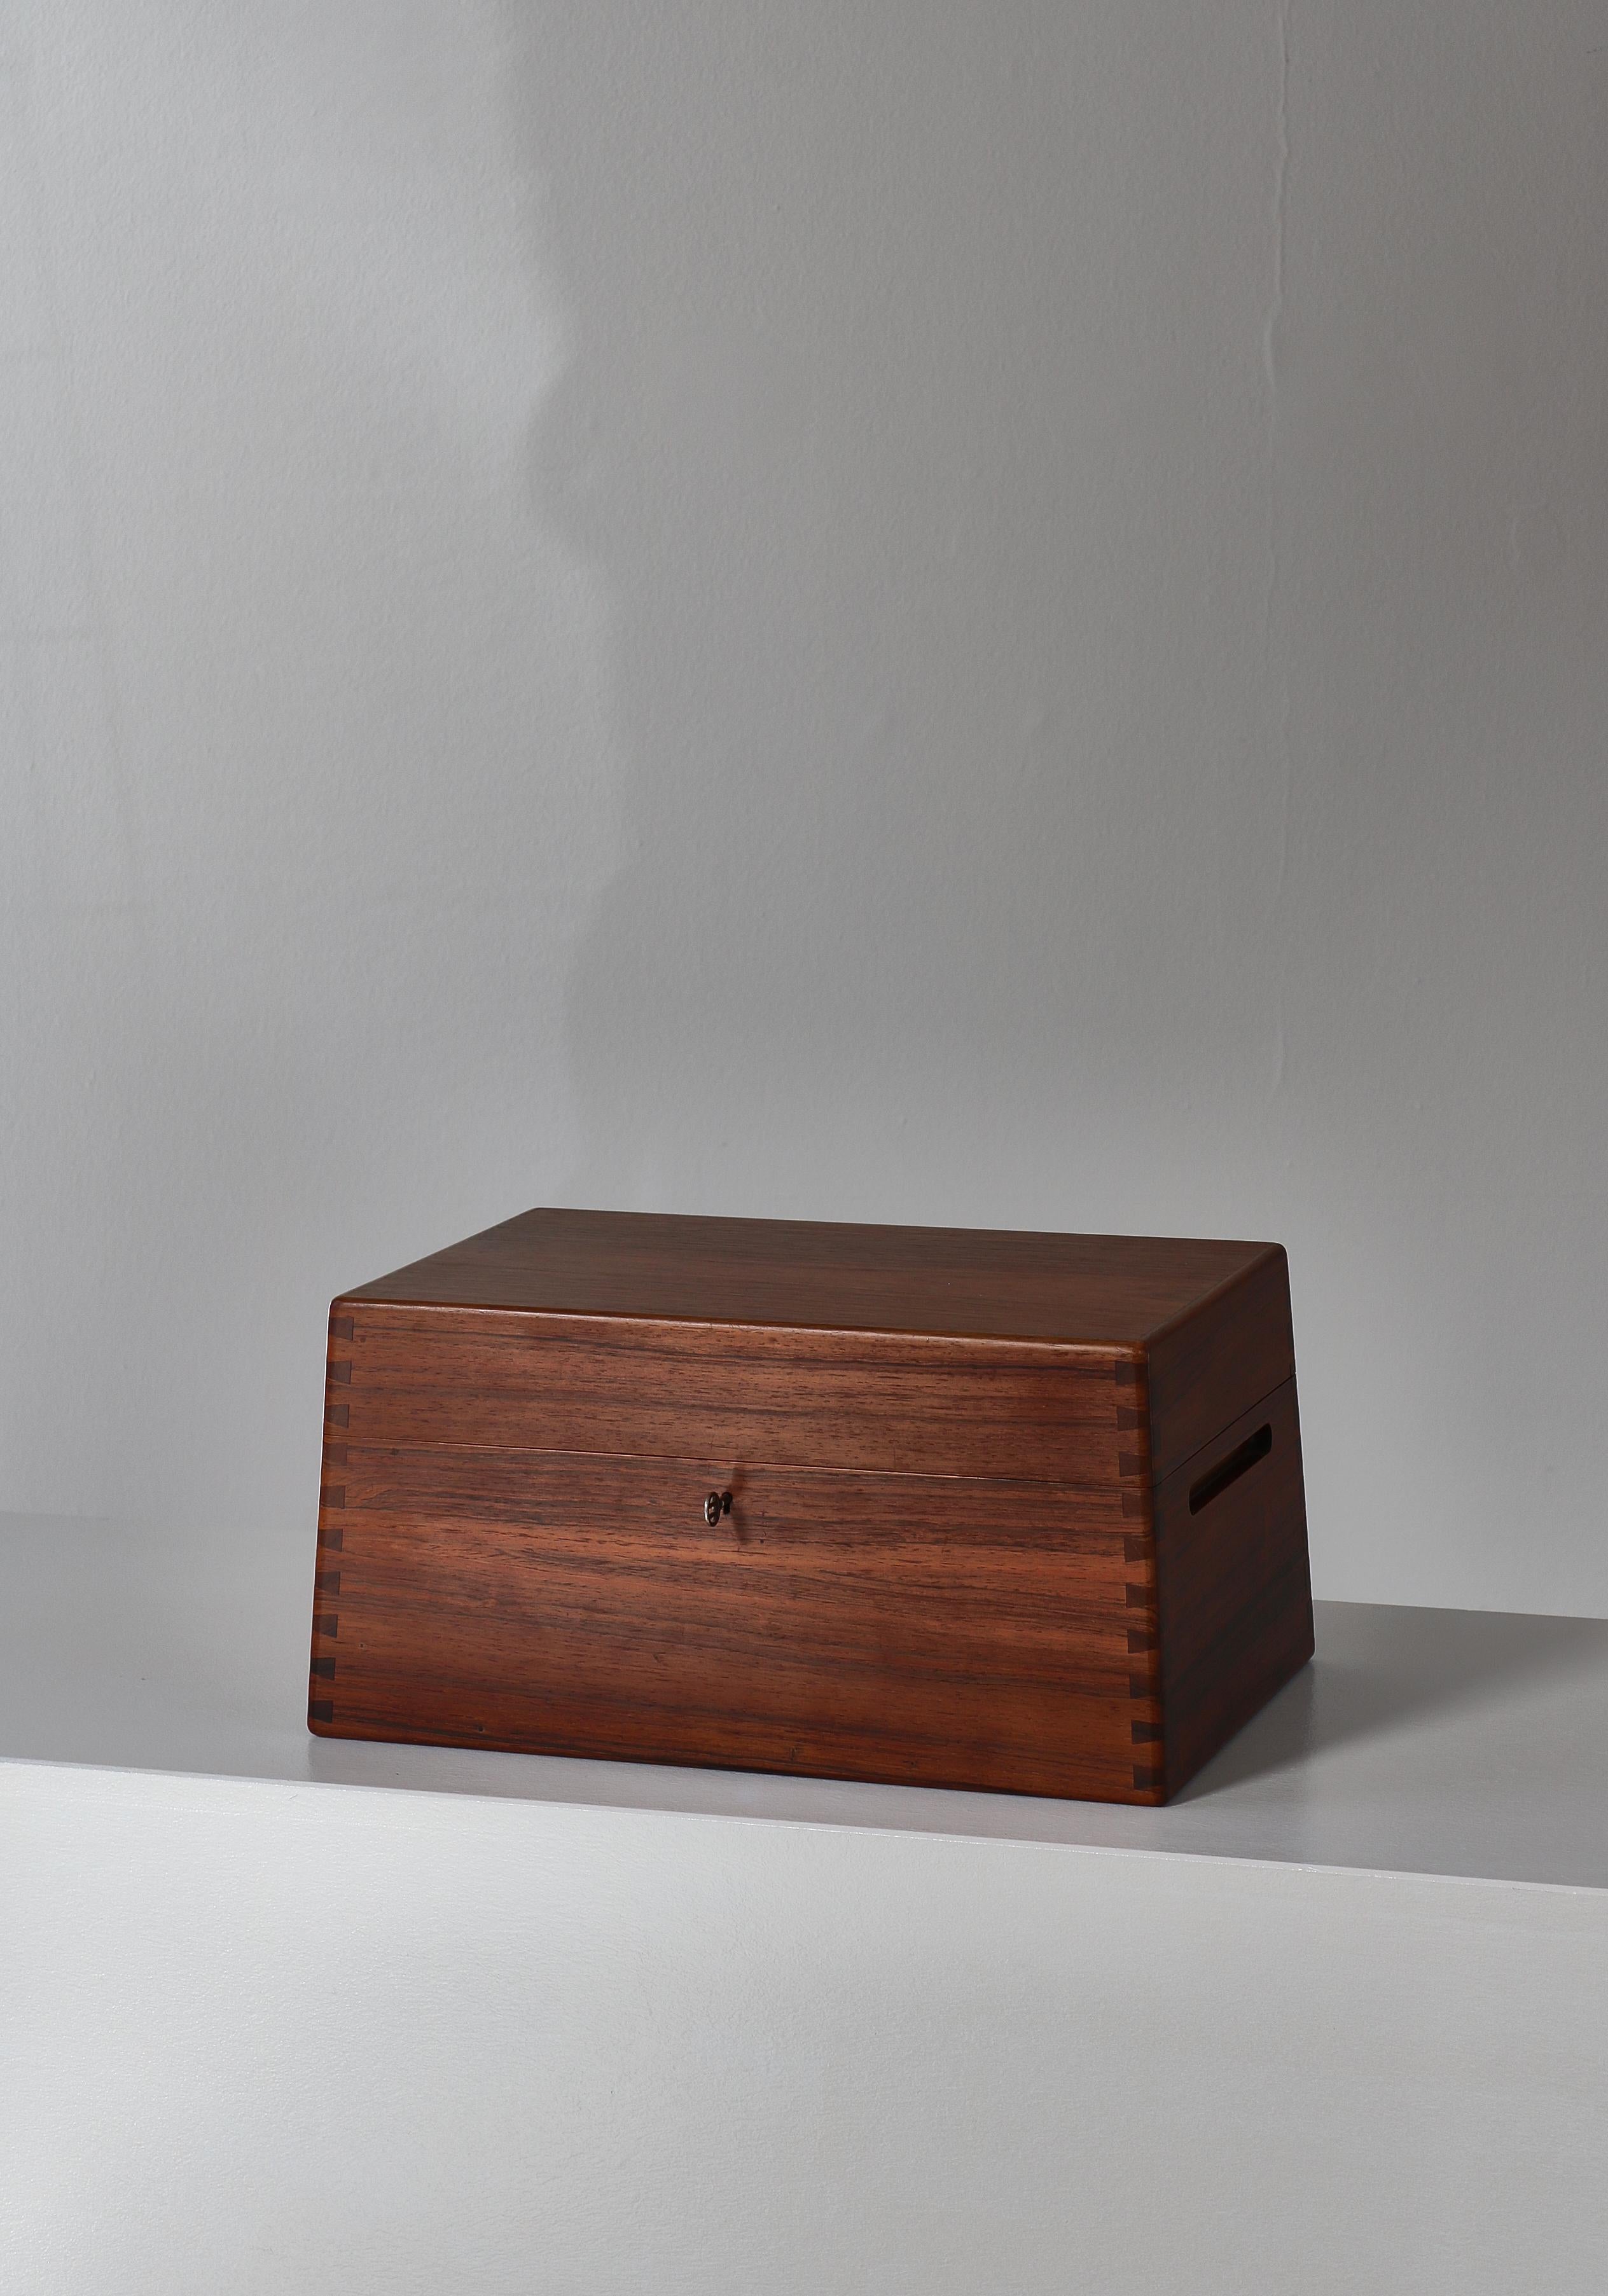 Rare and beautiful liqueur box made in the 1960s in Denmark by master cabinetmaker Søren Willadsen. The box is executed in solid rosewood and the glass and decanters are all hand blown at Holmegaard Glassworks.

Danish cabinetmaker Søren Willadsen